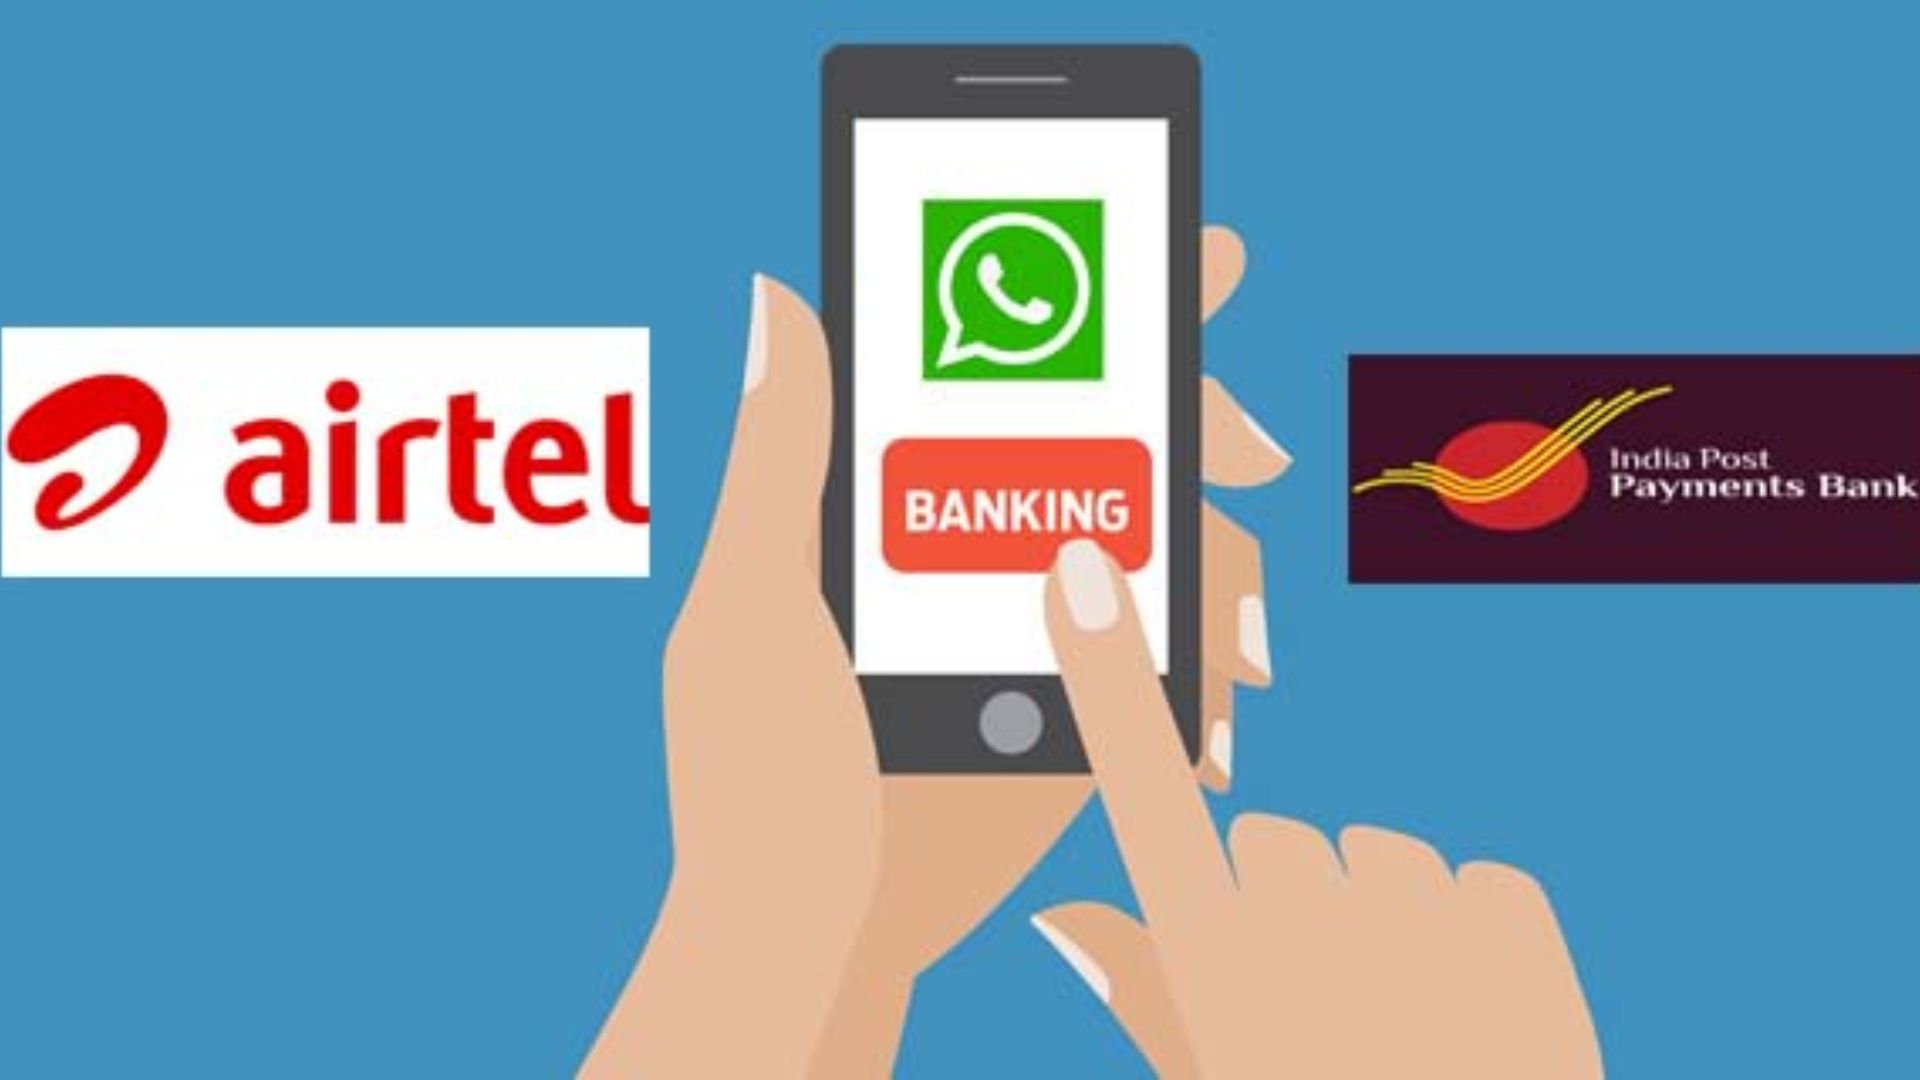 WhatsApp Banking Services